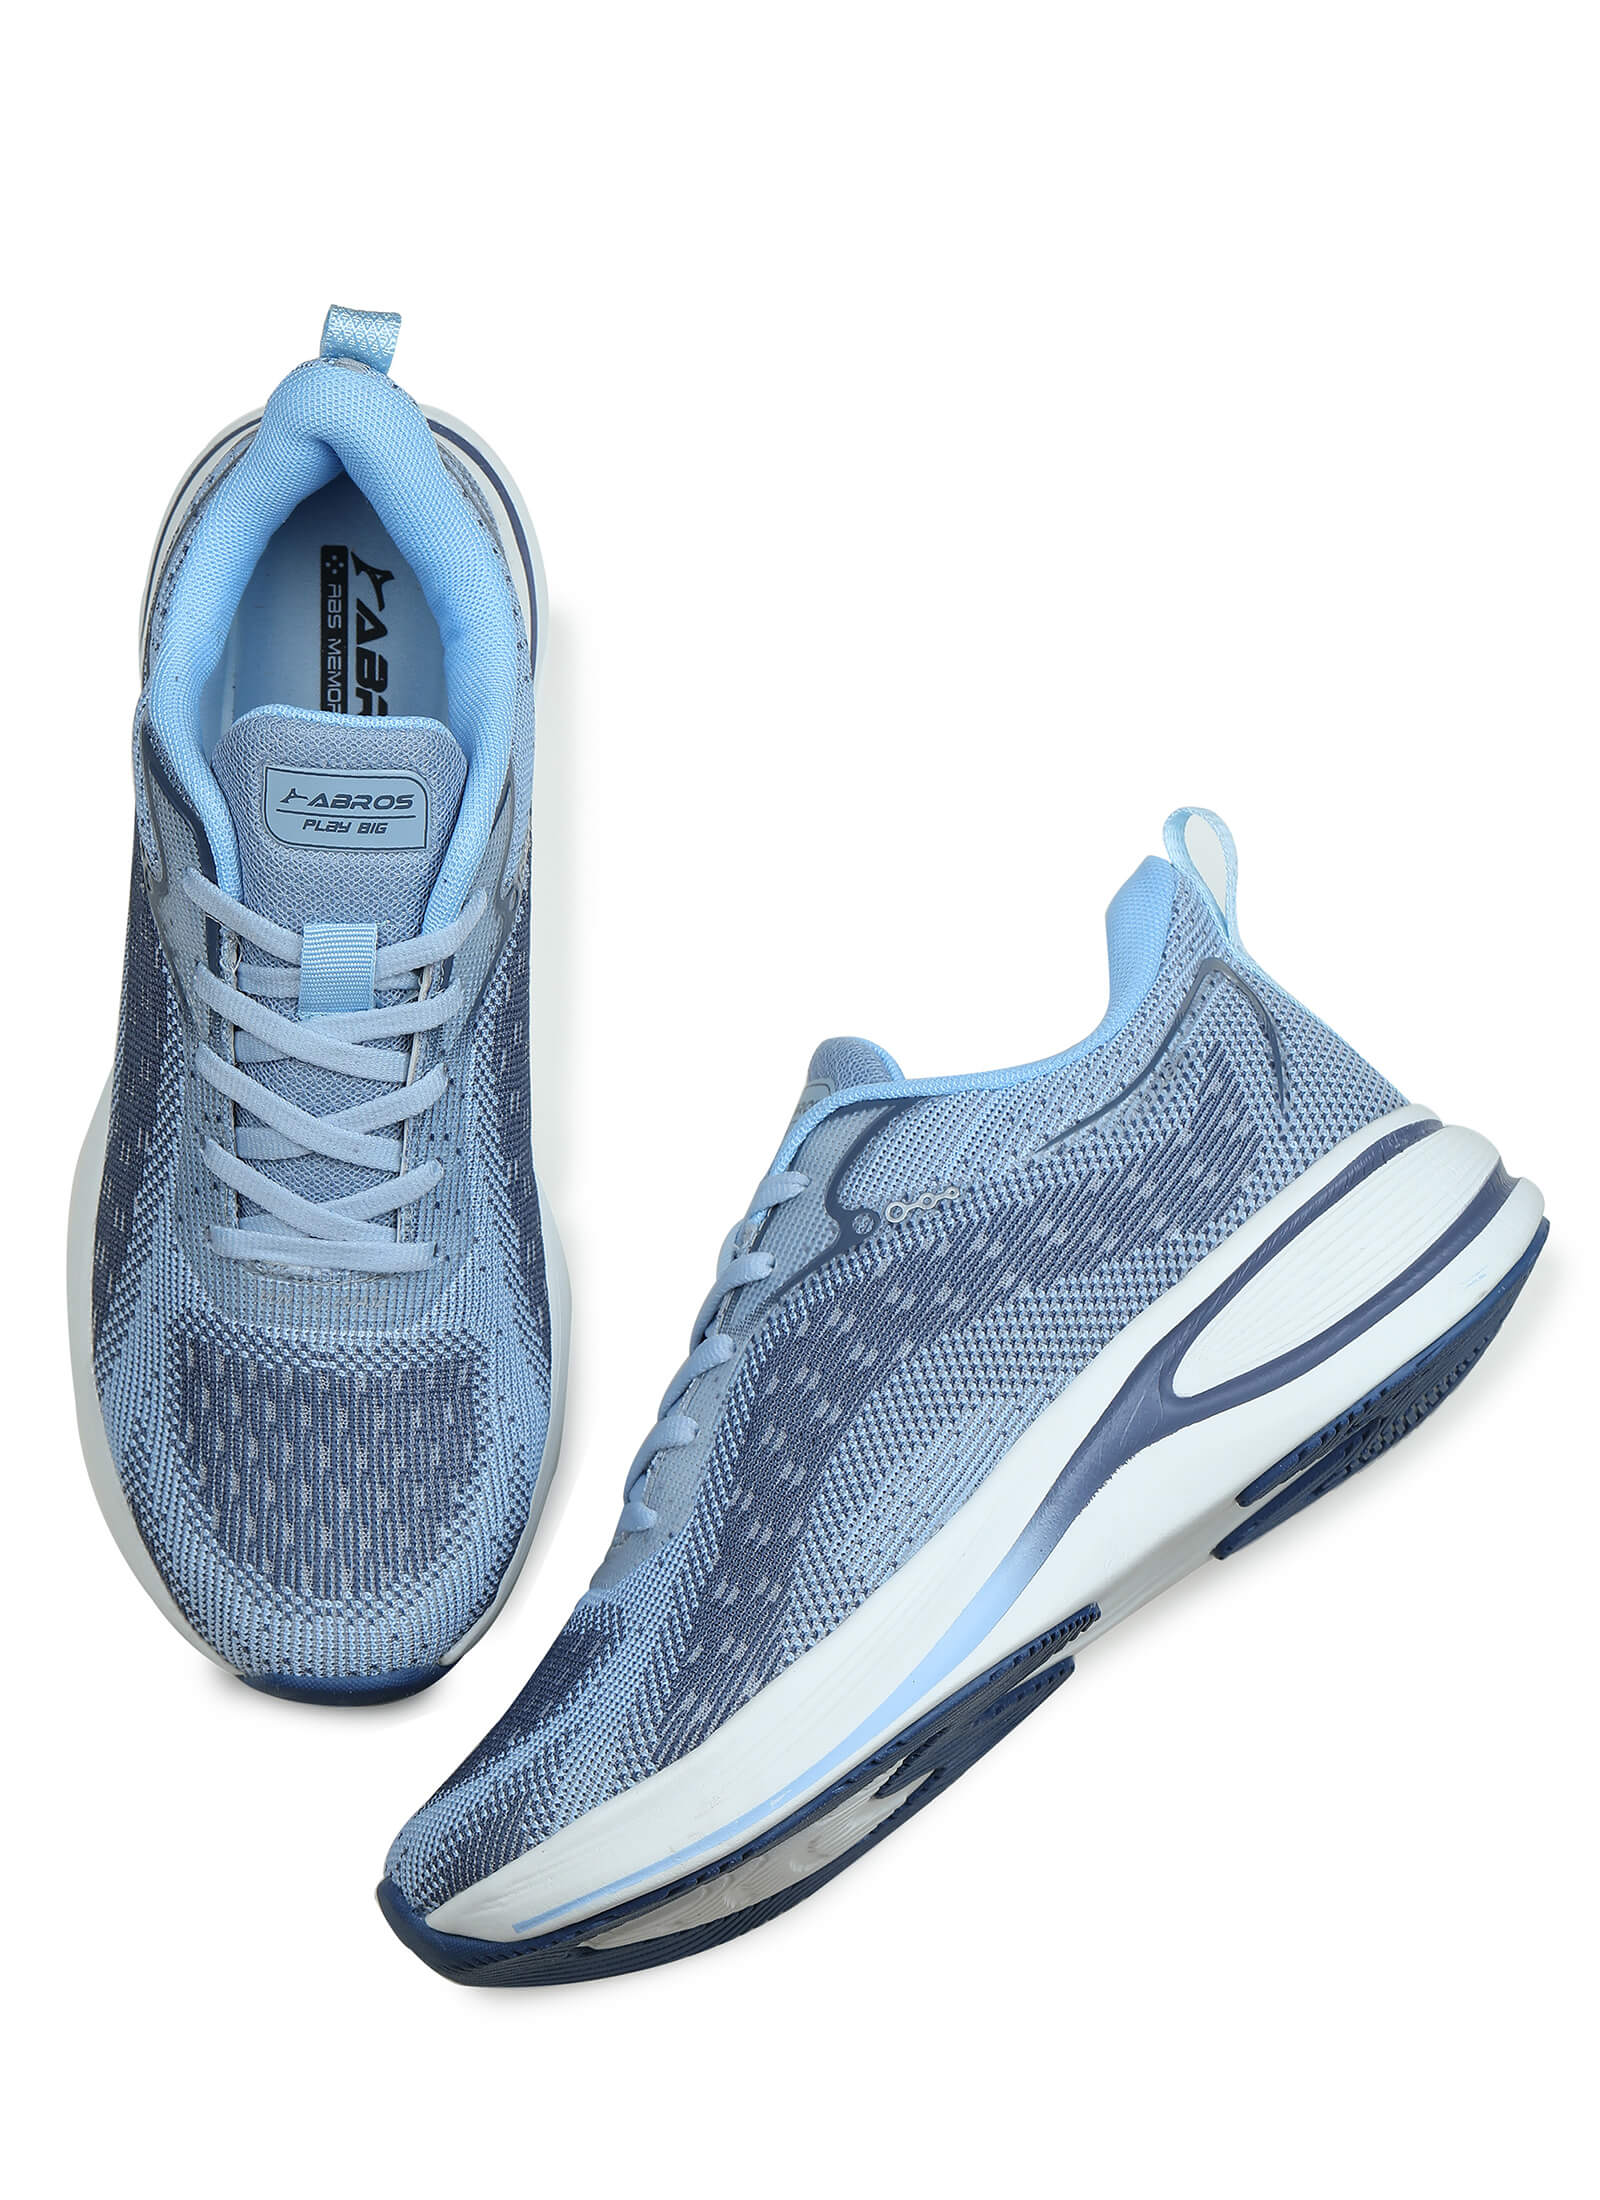 Steady Sports Shoes For Men